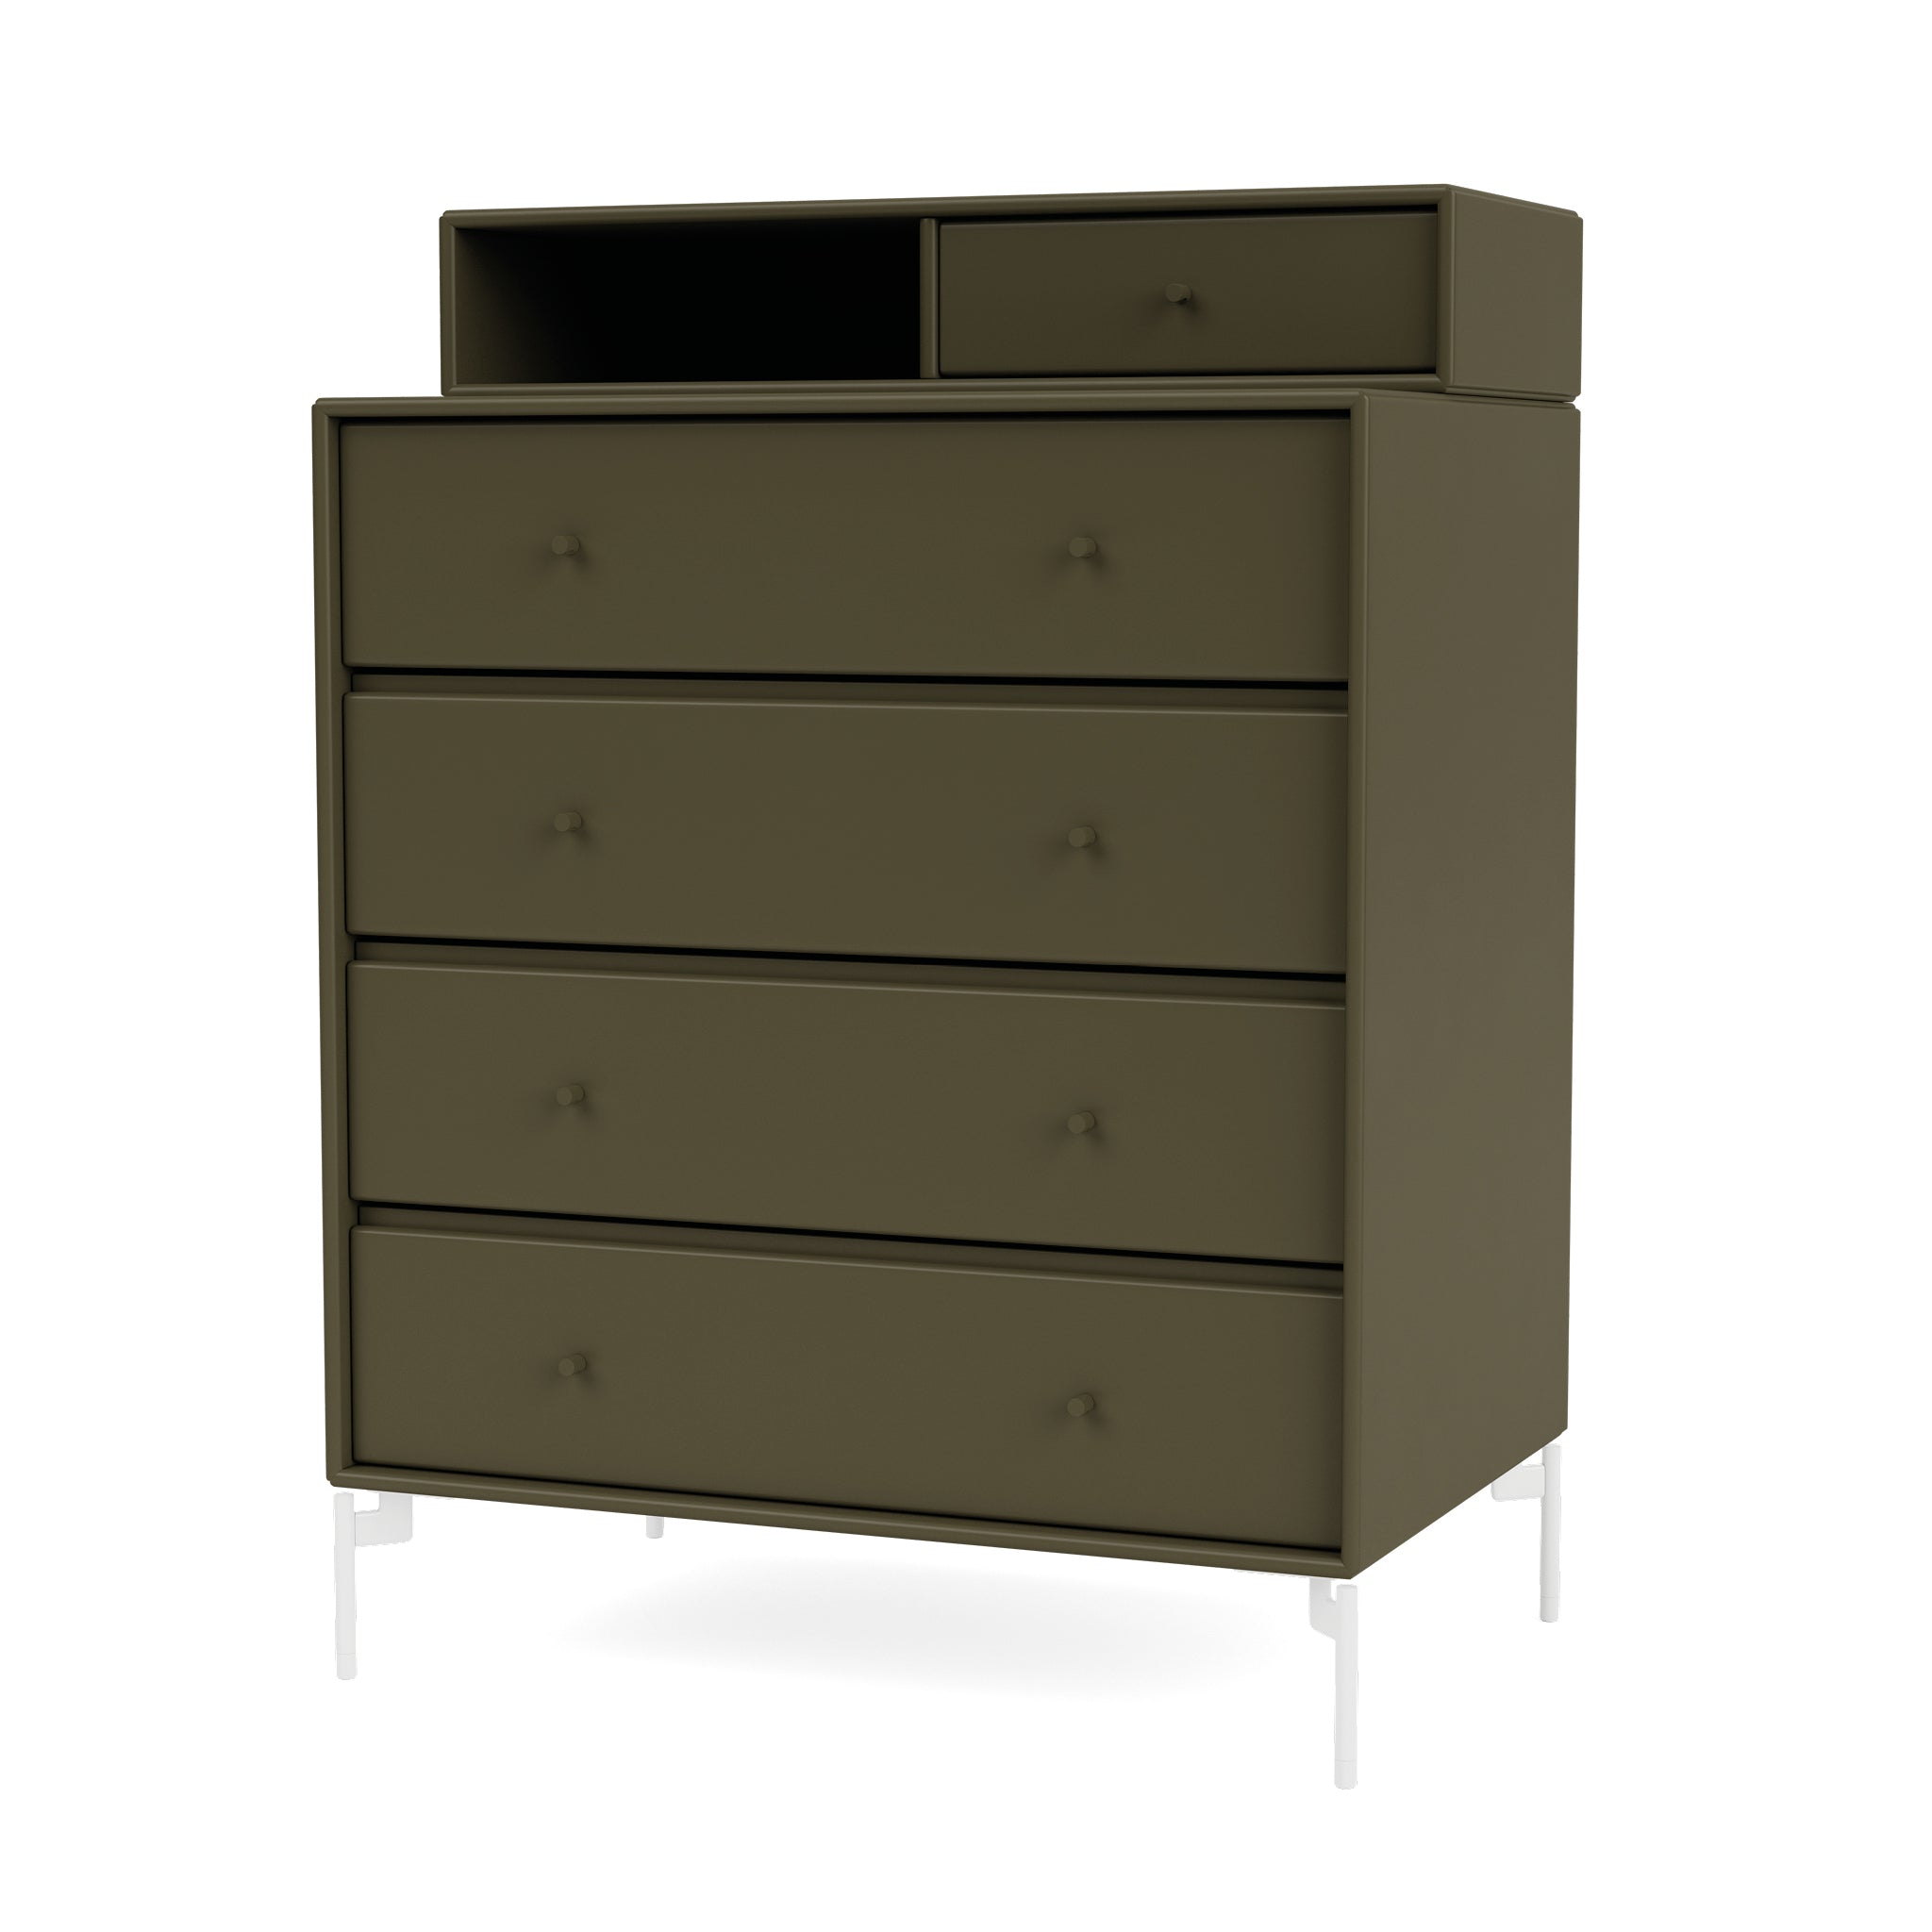 Keep Chest of Drawers by Montana Furniture